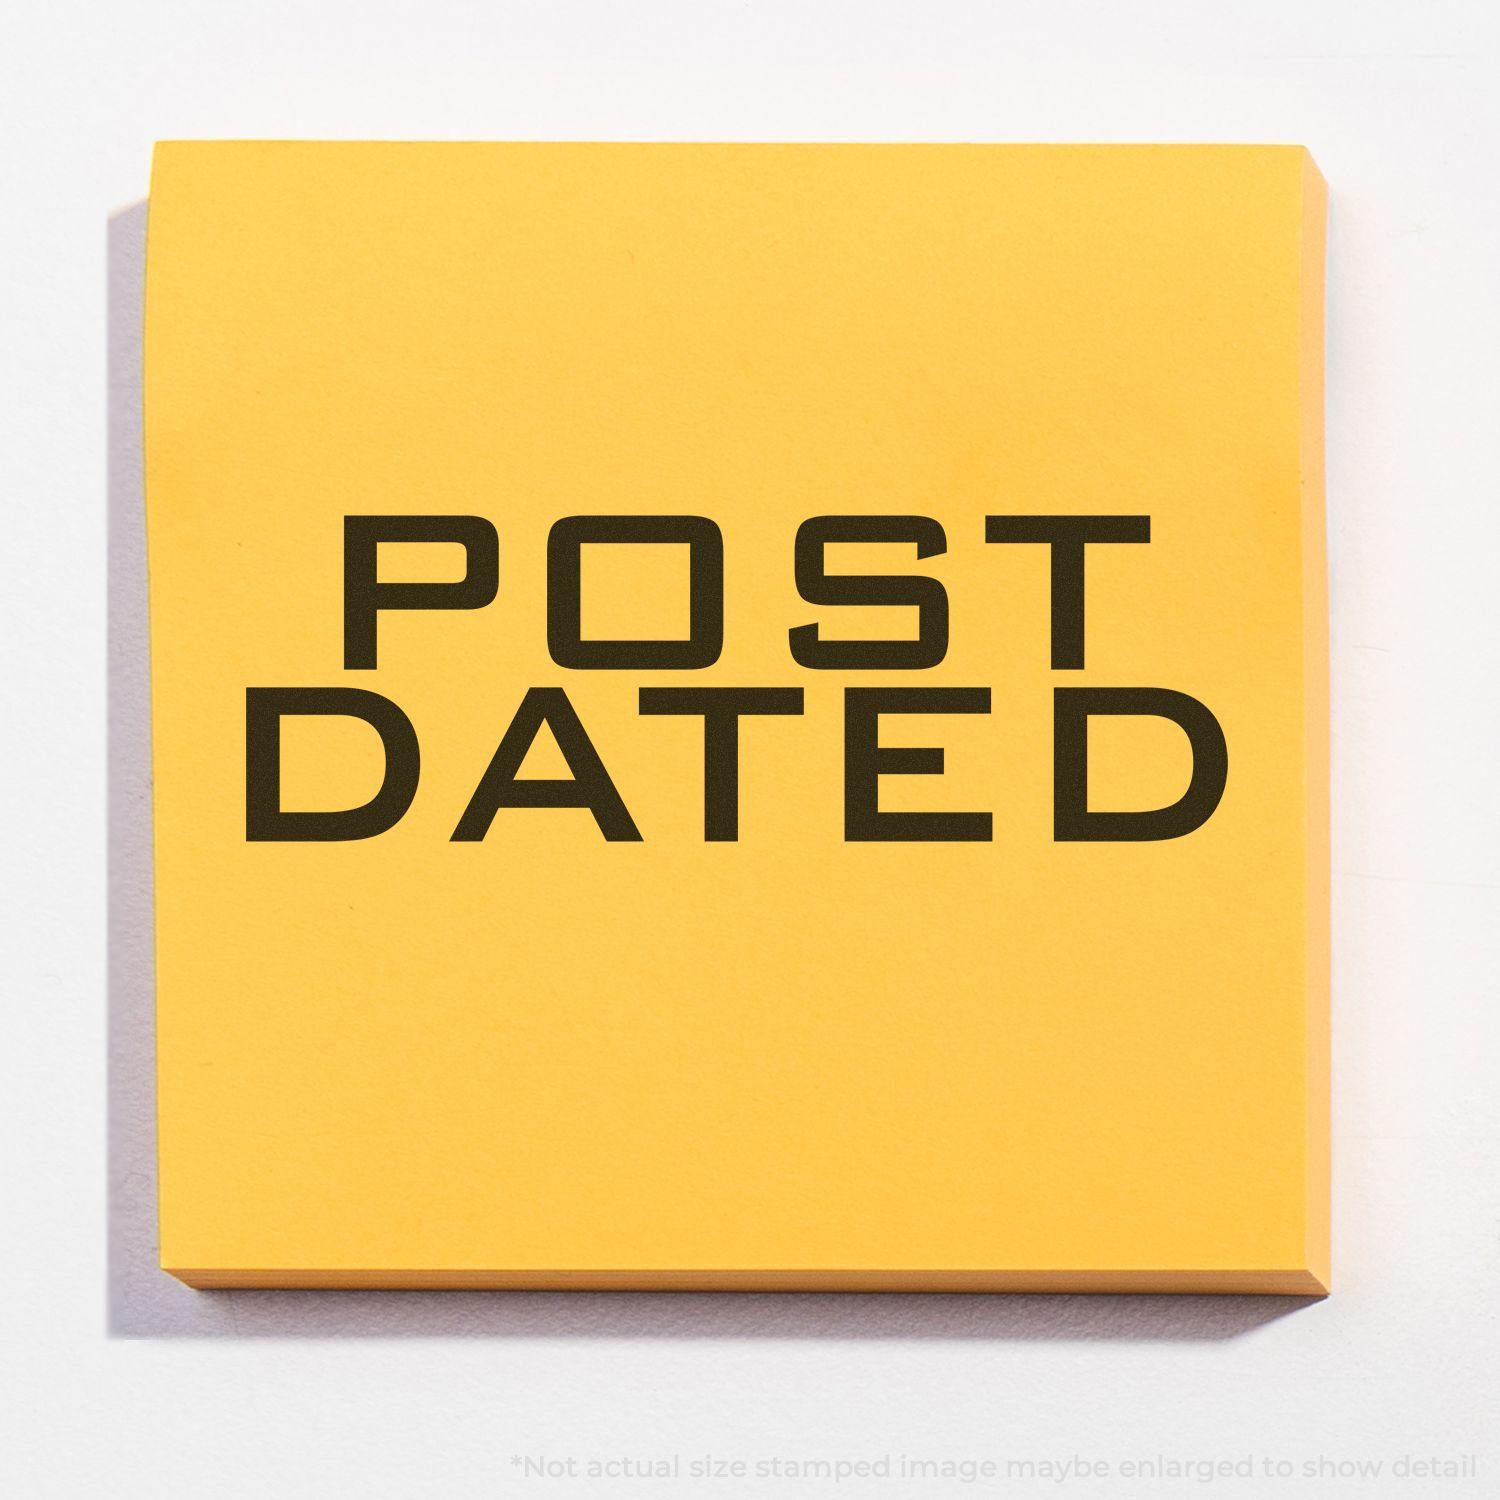 A stock office rubber stamp with a stamped image showing how the text "POST DATED" in a large font is displayed after stamping.